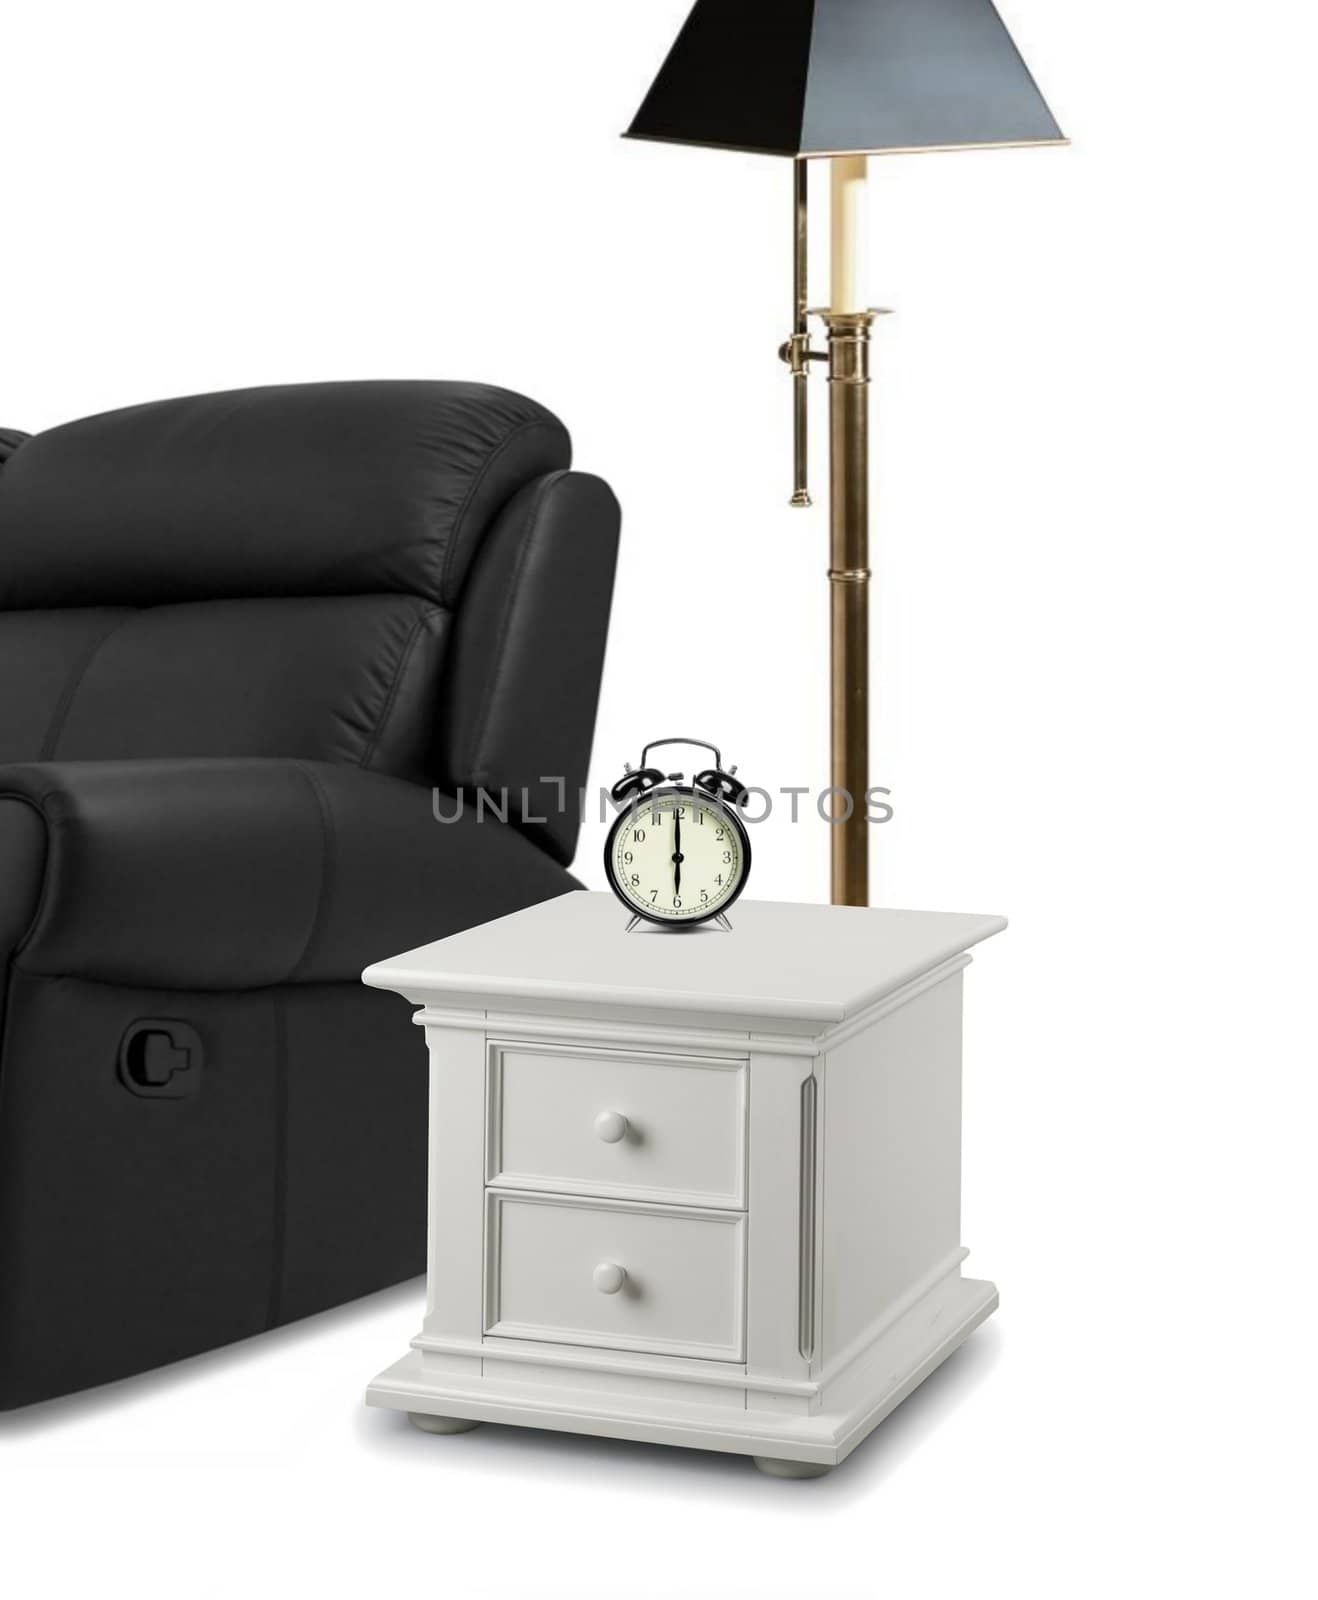 Image of clock on a side table